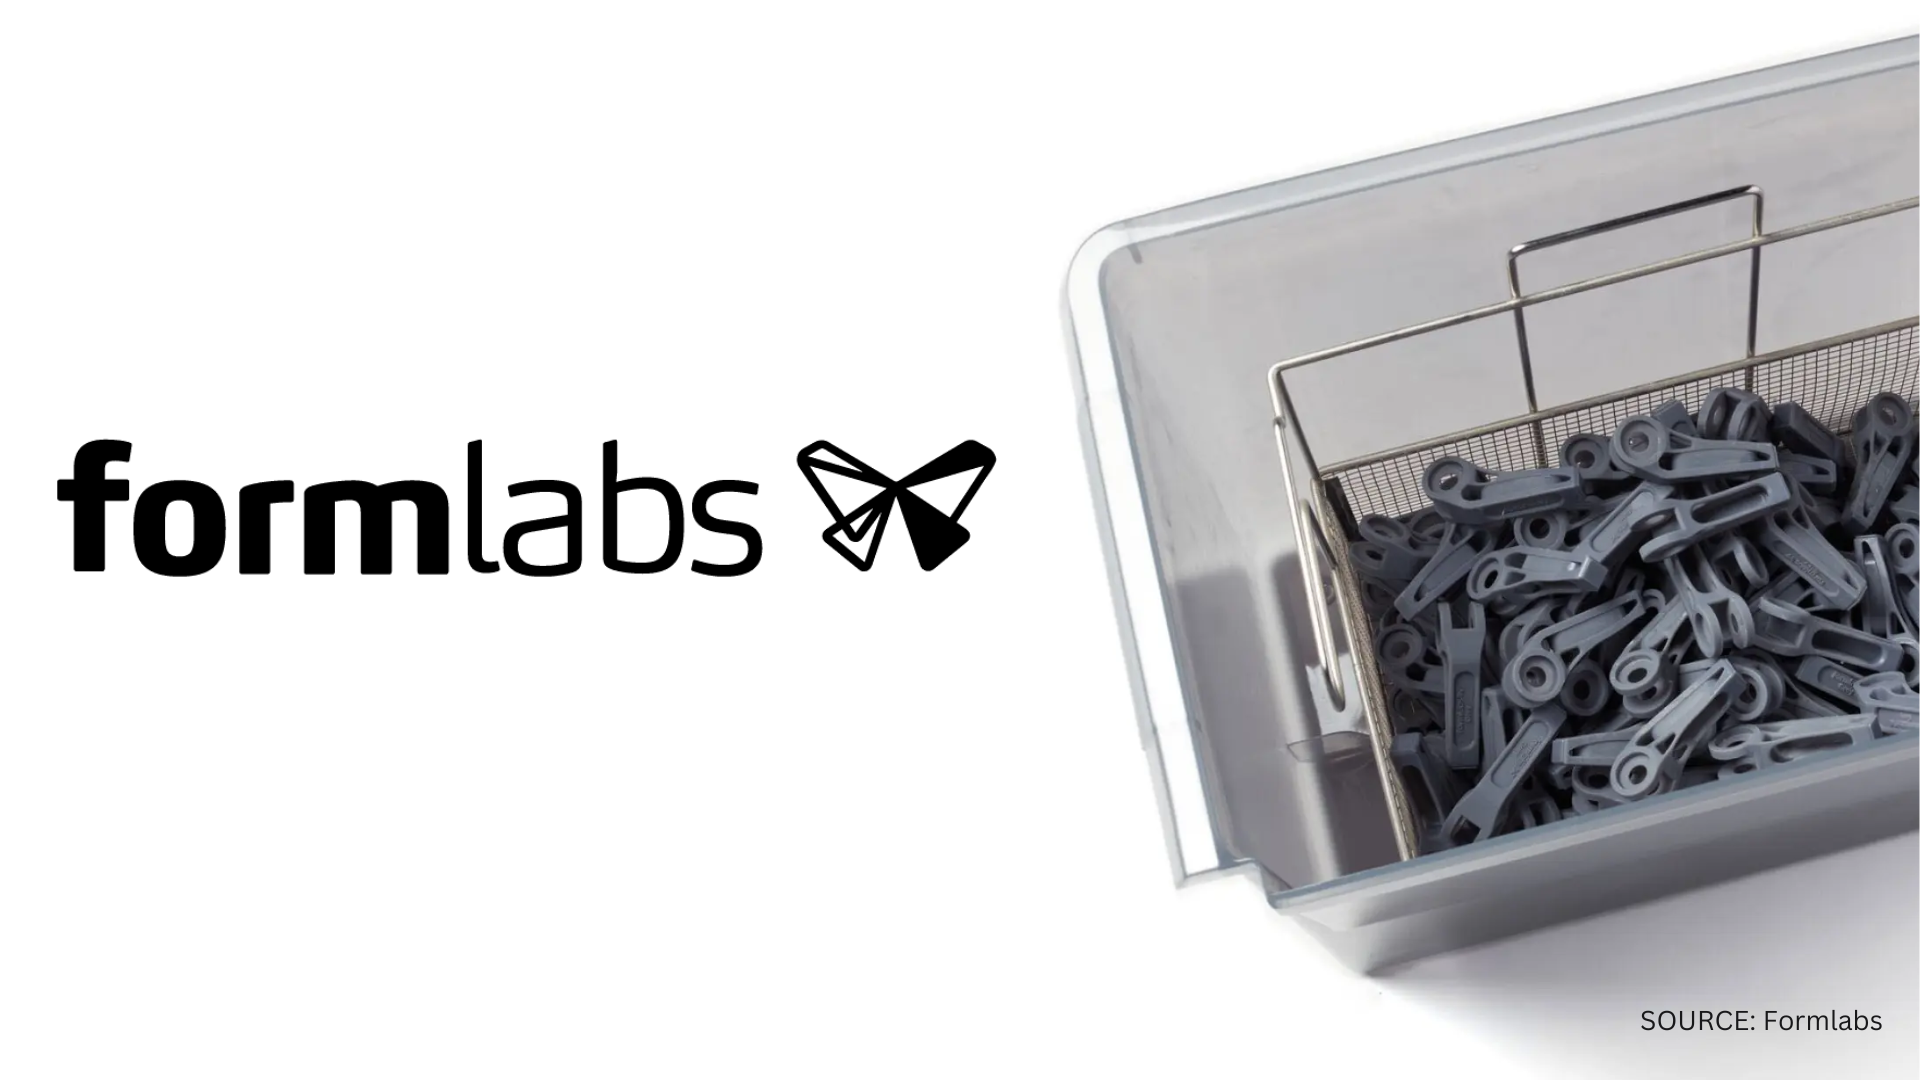 Formlabs introduced the Automation Ecosystem to enable new levels of 3D printing productivity with 24/7 printing, at CES 2023.